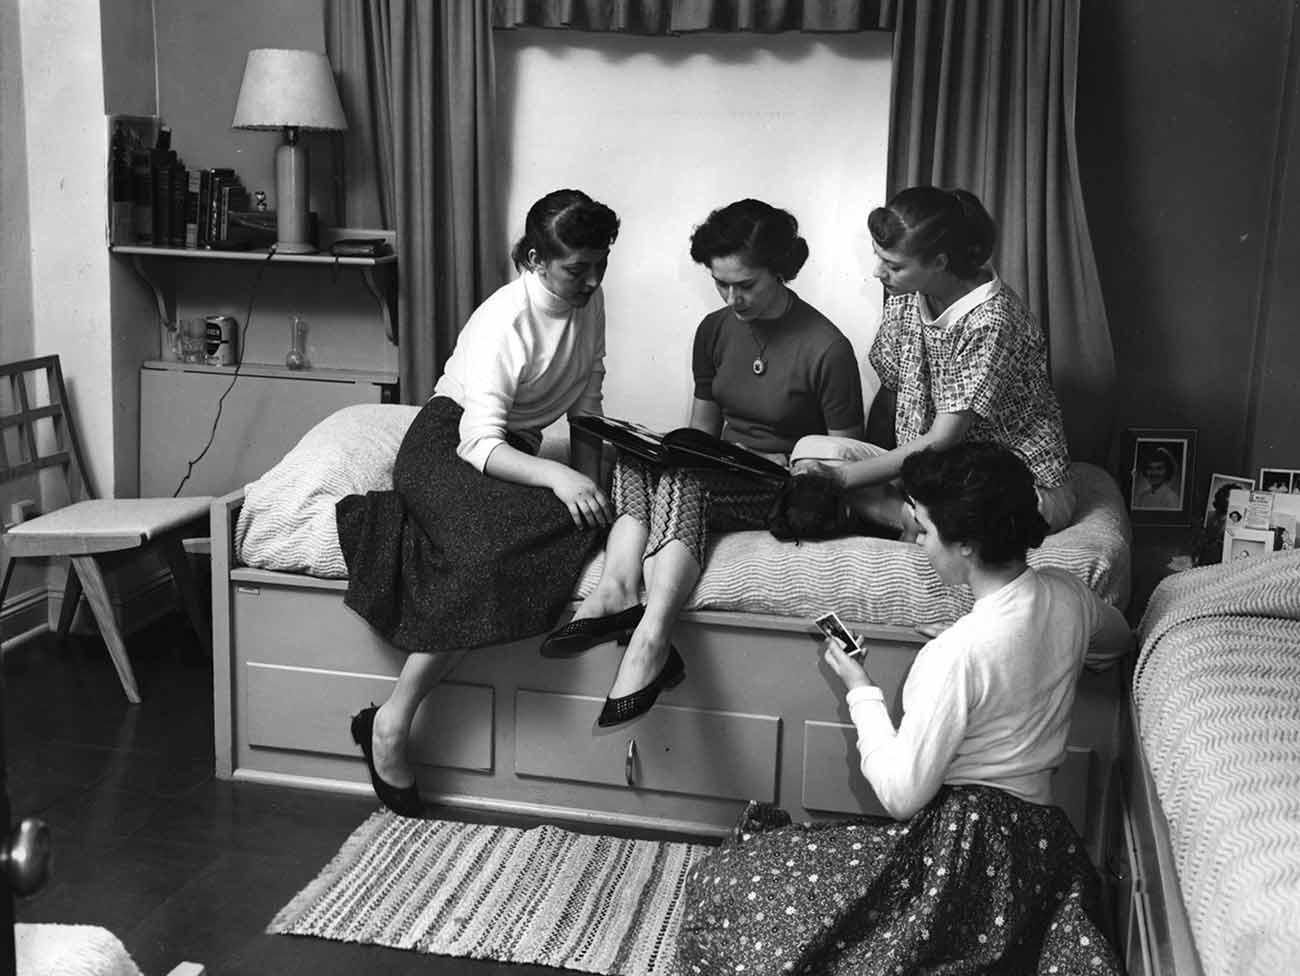 4 young women inside a dorm room reading a book